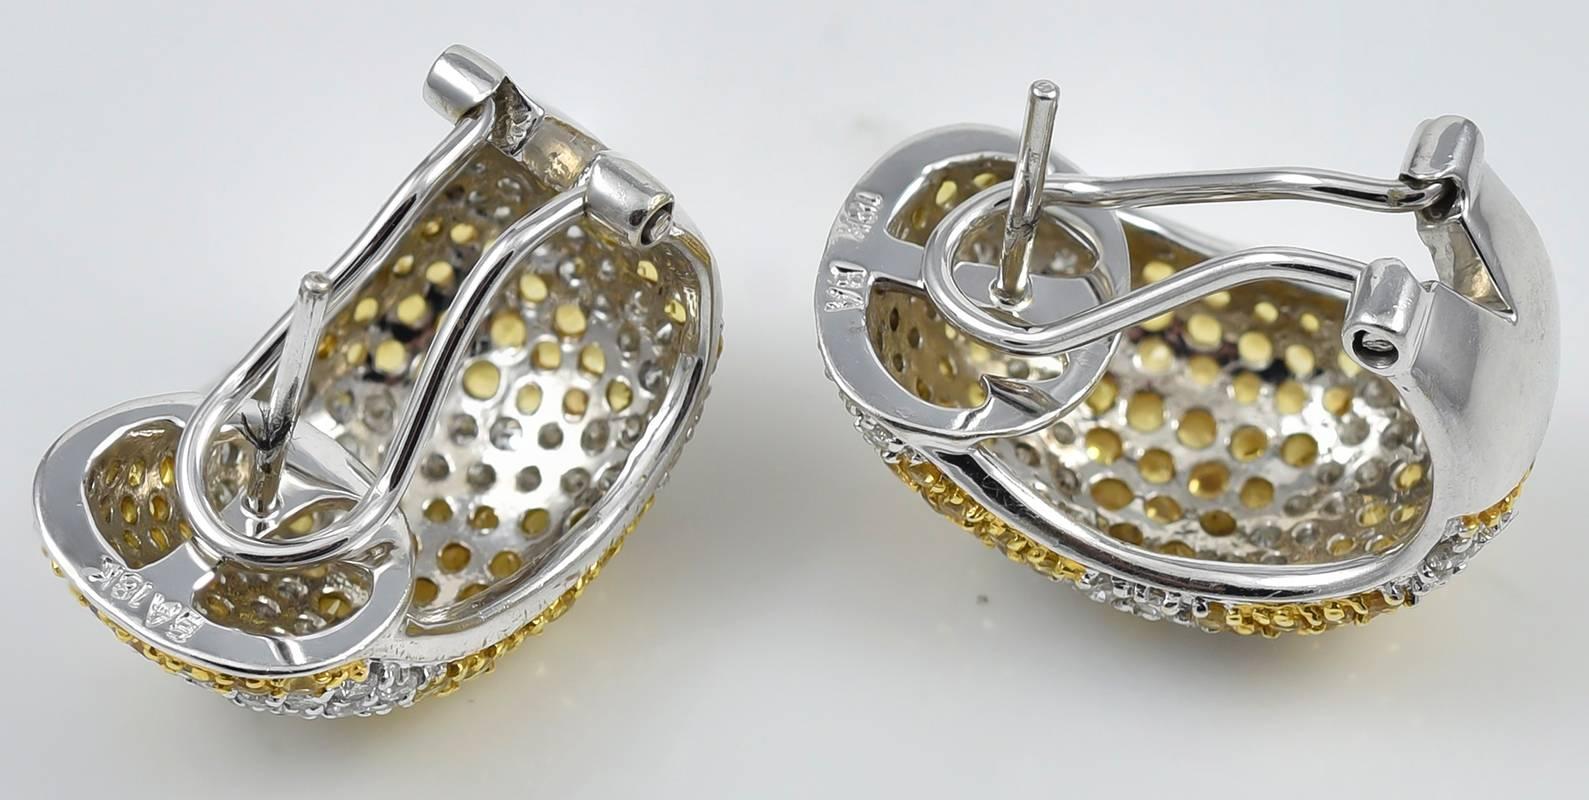 Very unusual and attractive earrings.  Yellow sapphires (2.0 cts.) and bright white diamonds (2.70 cts.) set in a diagonal line pattern.  18K white gold.  1/2